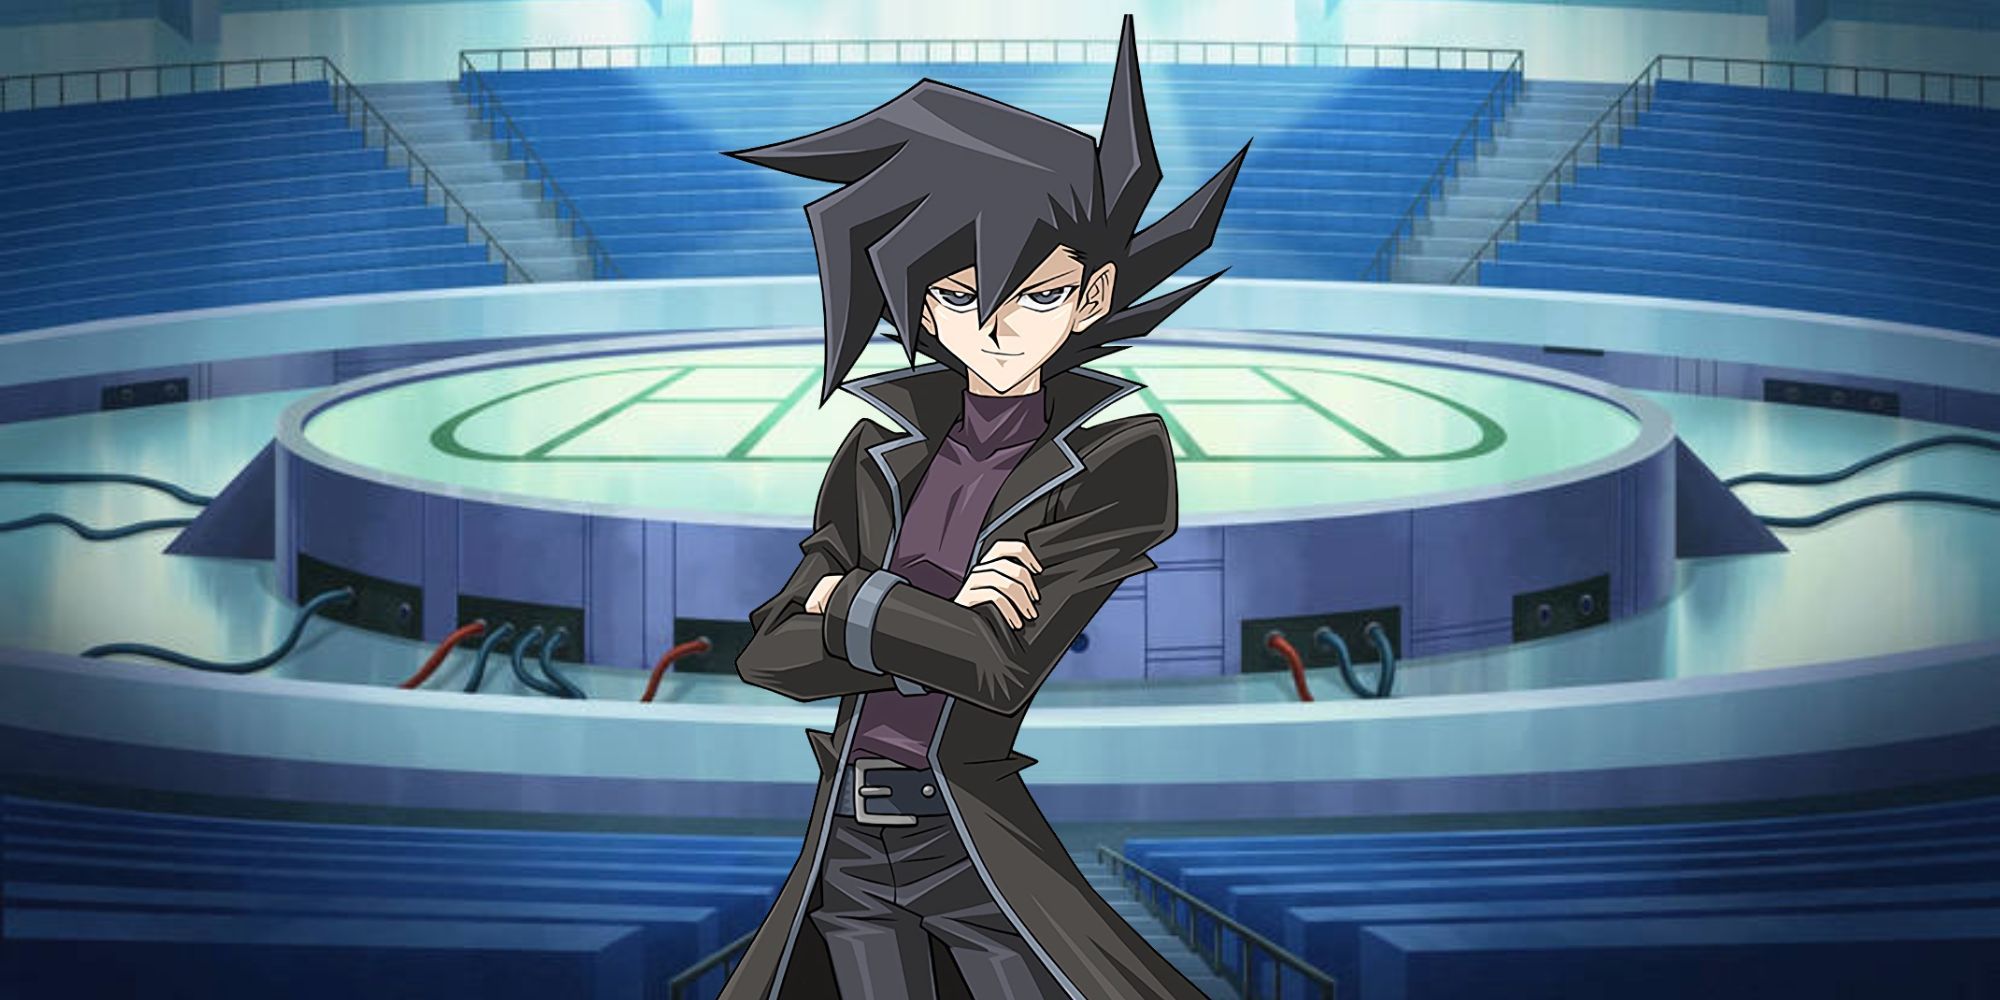 Yu-Gi-Oh! GX Character: Chazz Princeton With the GX Arena In The Background